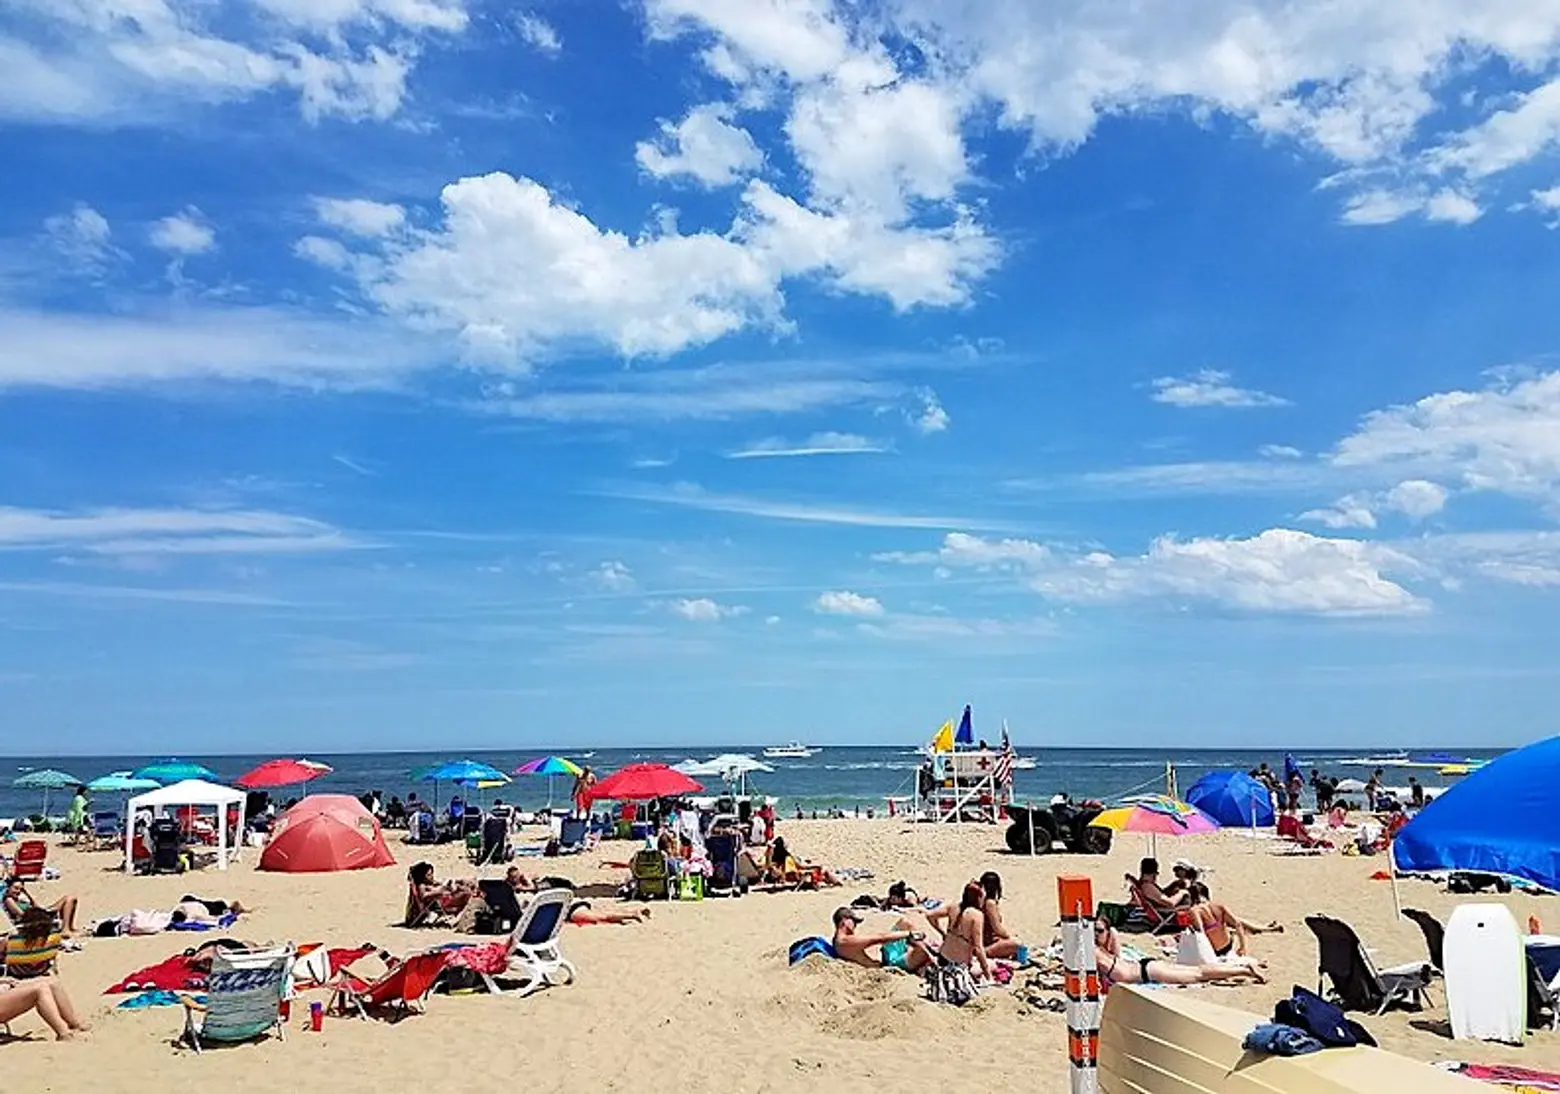 Gearing up for summer, Jersey Shore homeowners are fighting Airbnb tax on short-term rentals